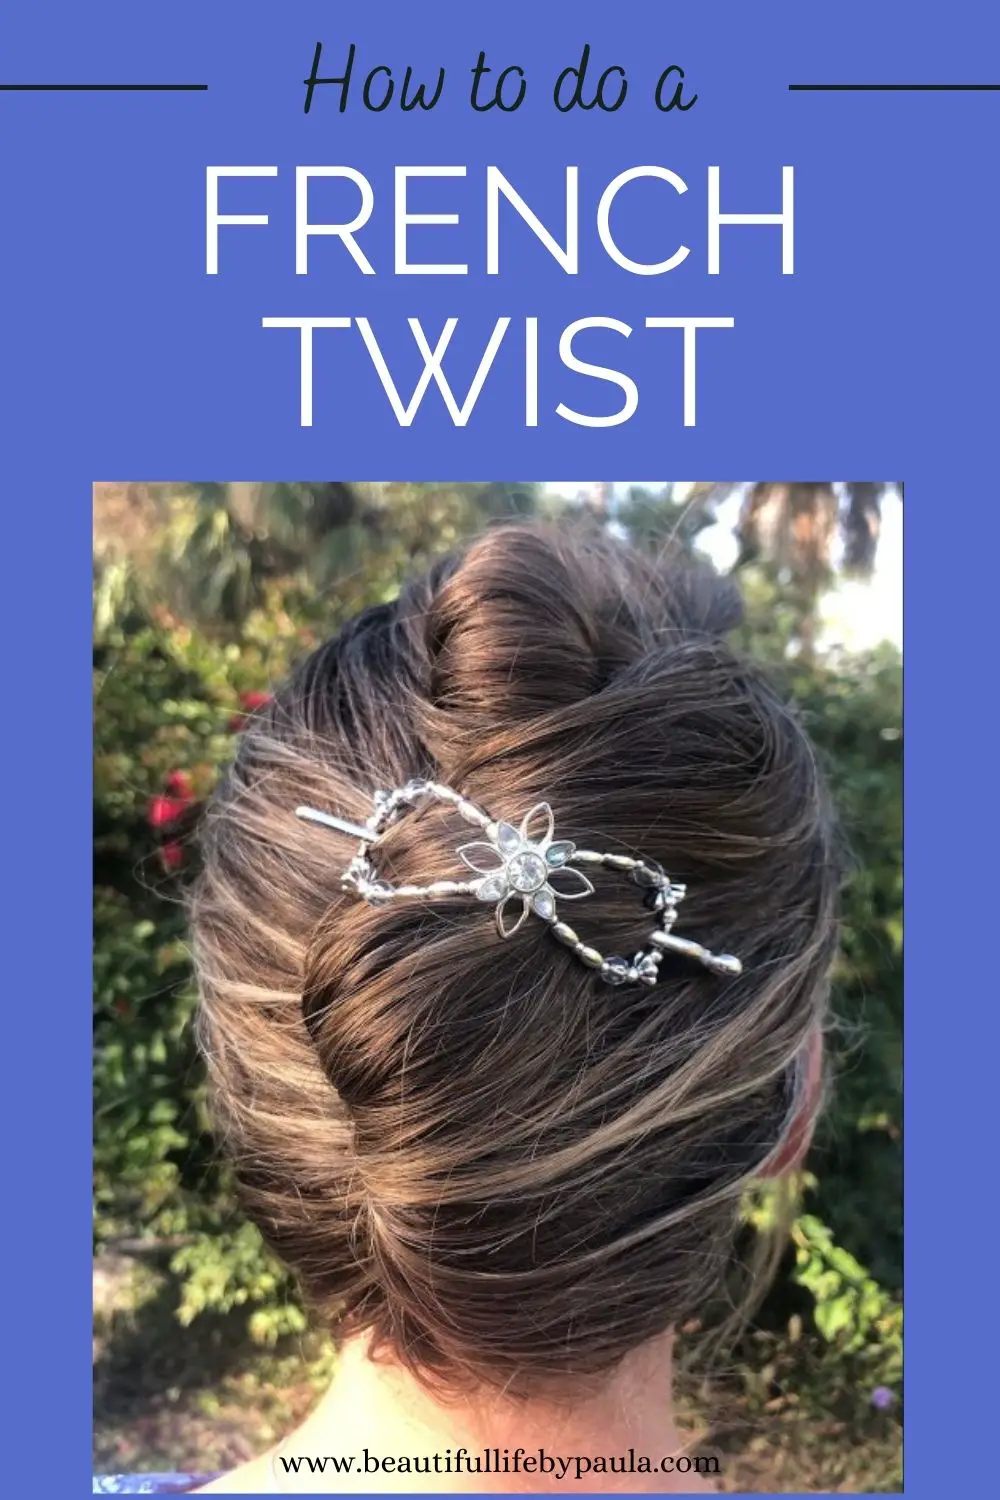 how to do a French twist